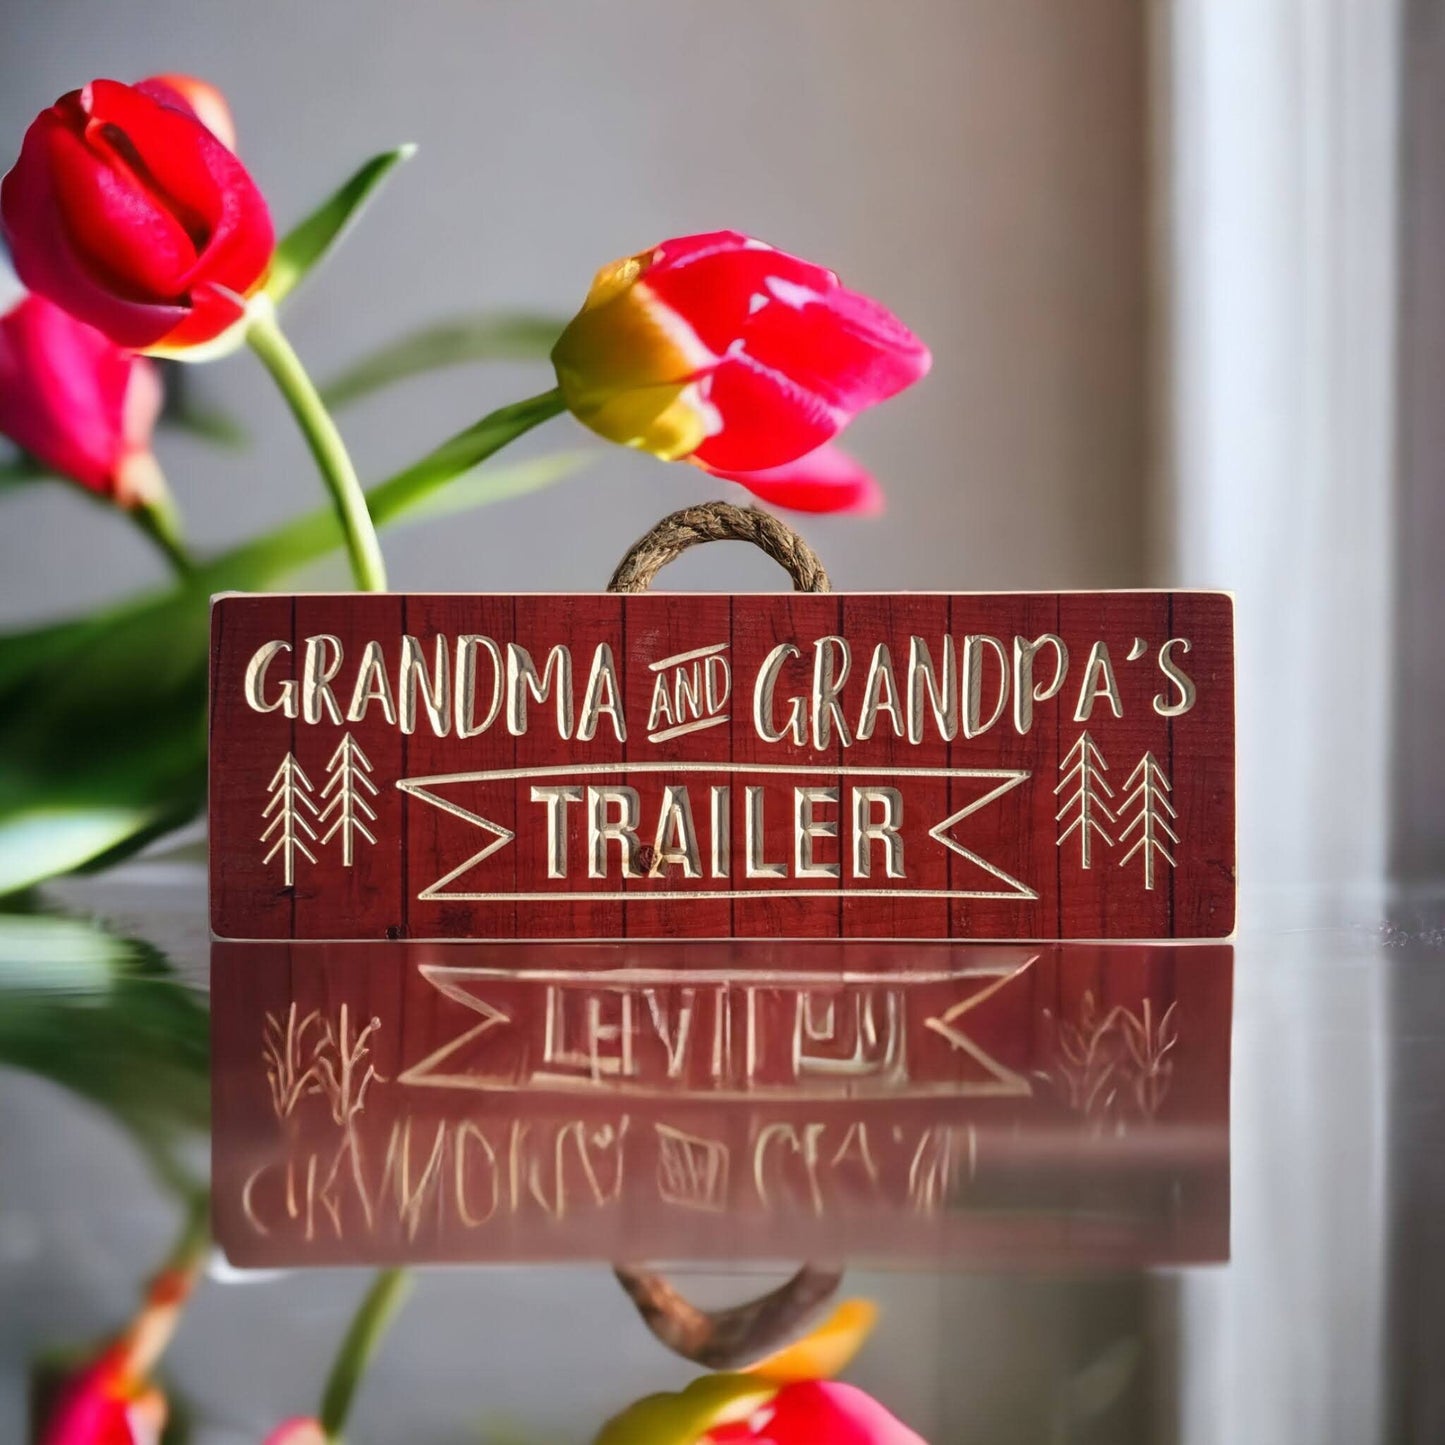 Grandma and Grandpa's sign with red background